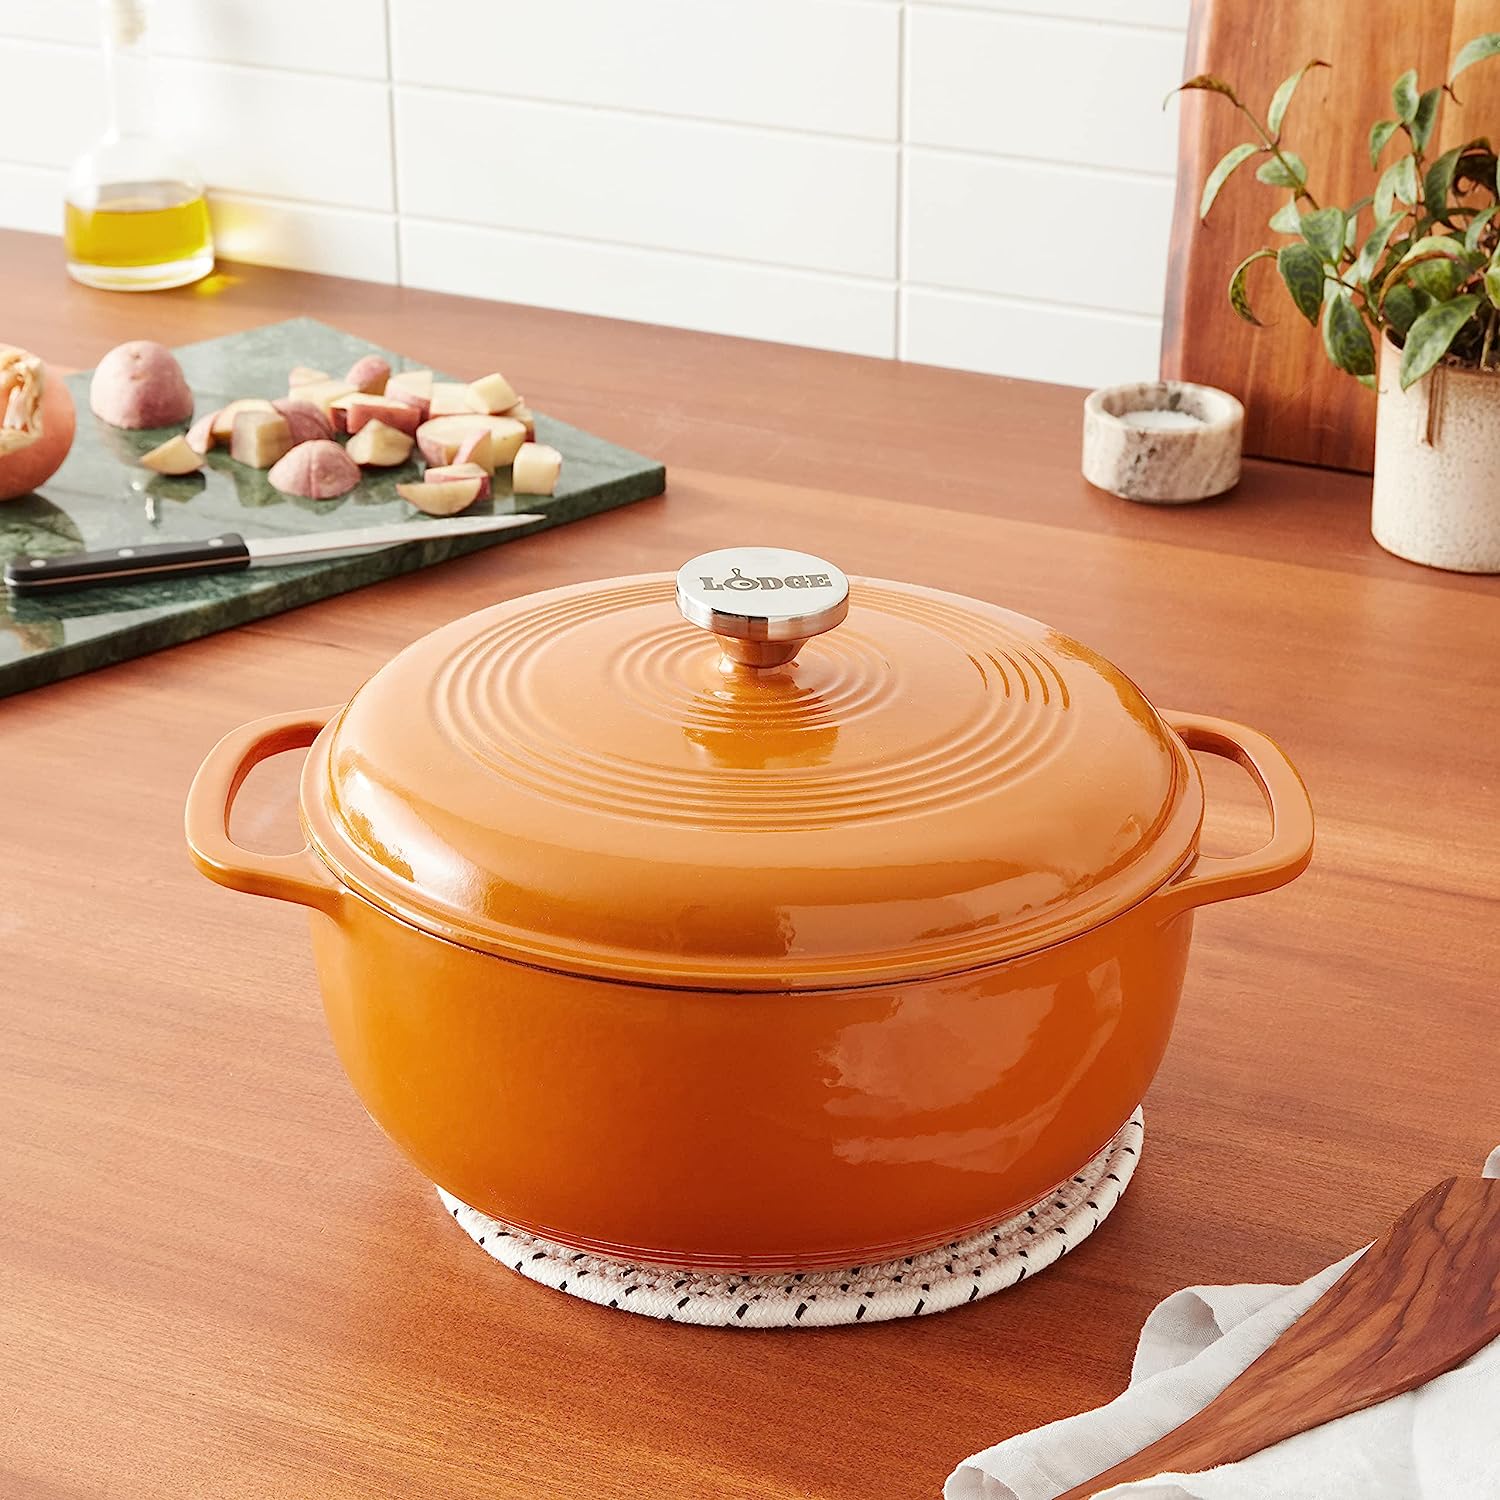 https://bigbigmart.com/wp-content/uploads/2023/07/Lodge-6-Quart-Enameled-Cast-Iron-Dutch-Oven-with-Lid-%E2%80%93-Dual-Handles-%E2%80%93-Oven-Safe-up-to-500%C2%B0-F-or-on-Stovetop-Use-to-Marinate-Cook-Bake-Refrigerate-and-Serve-%E2%80%93-Apricot4.jpg